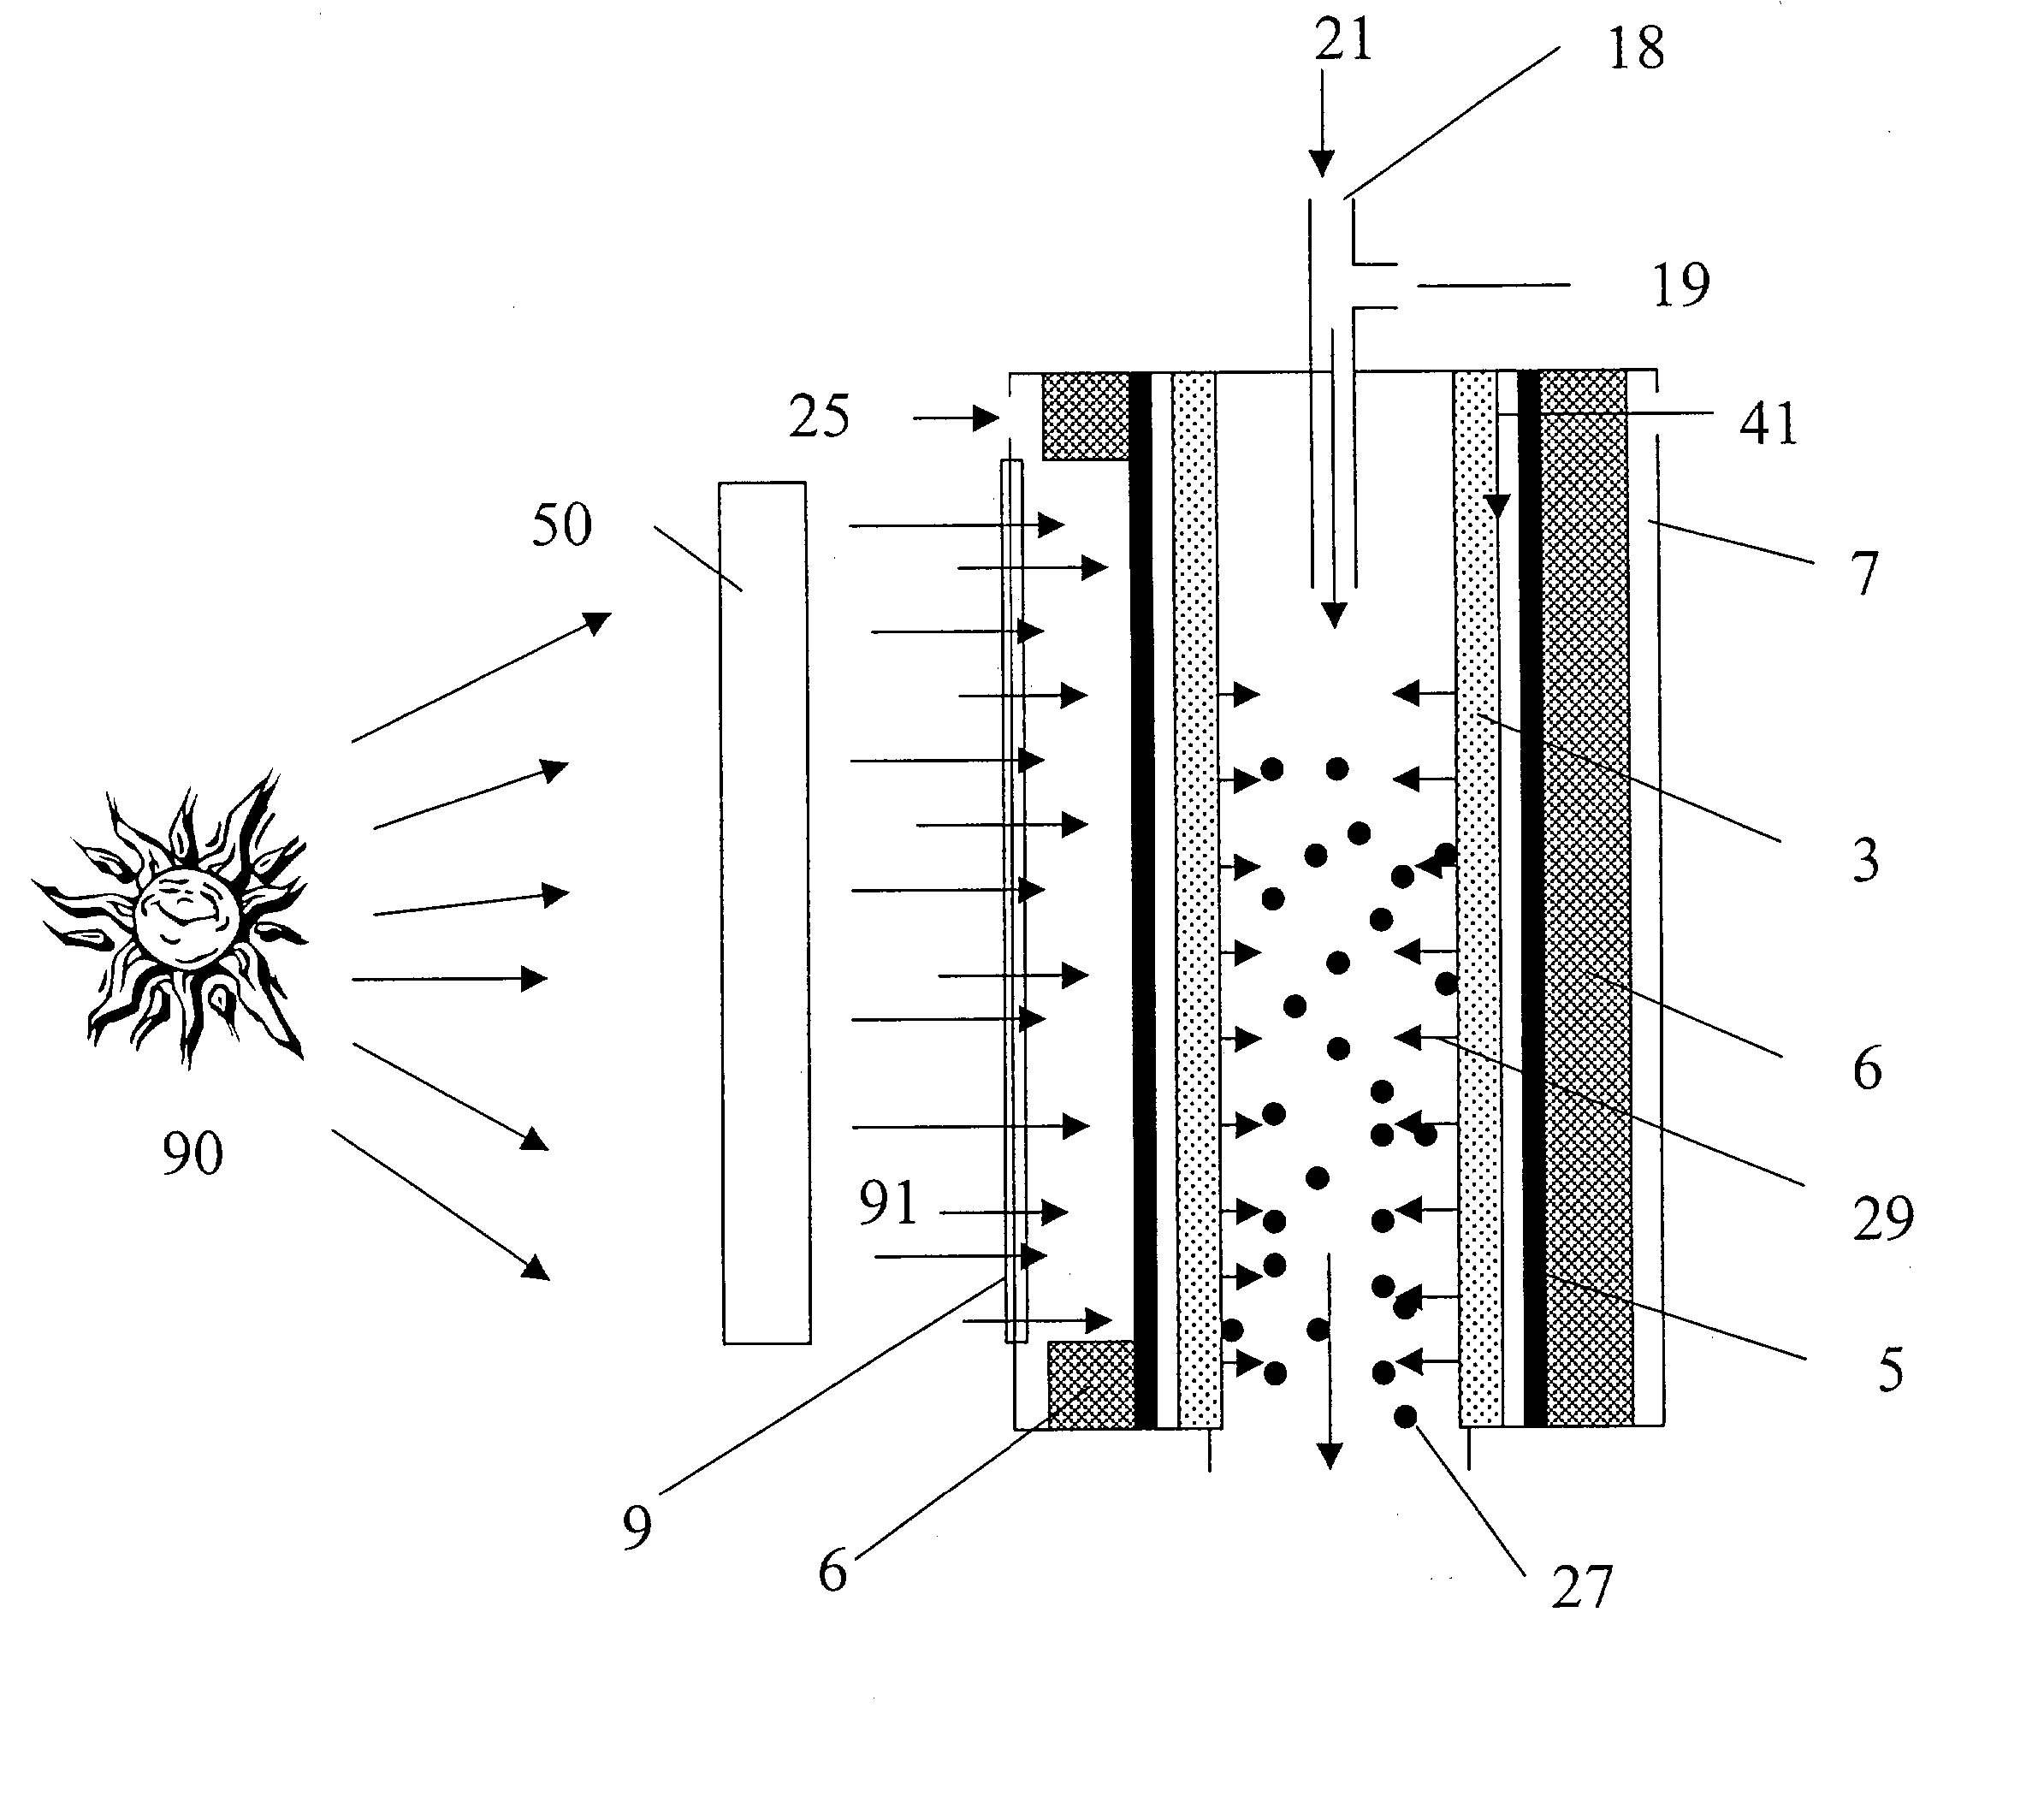 Solar-thermal fluid-wall reaction processing